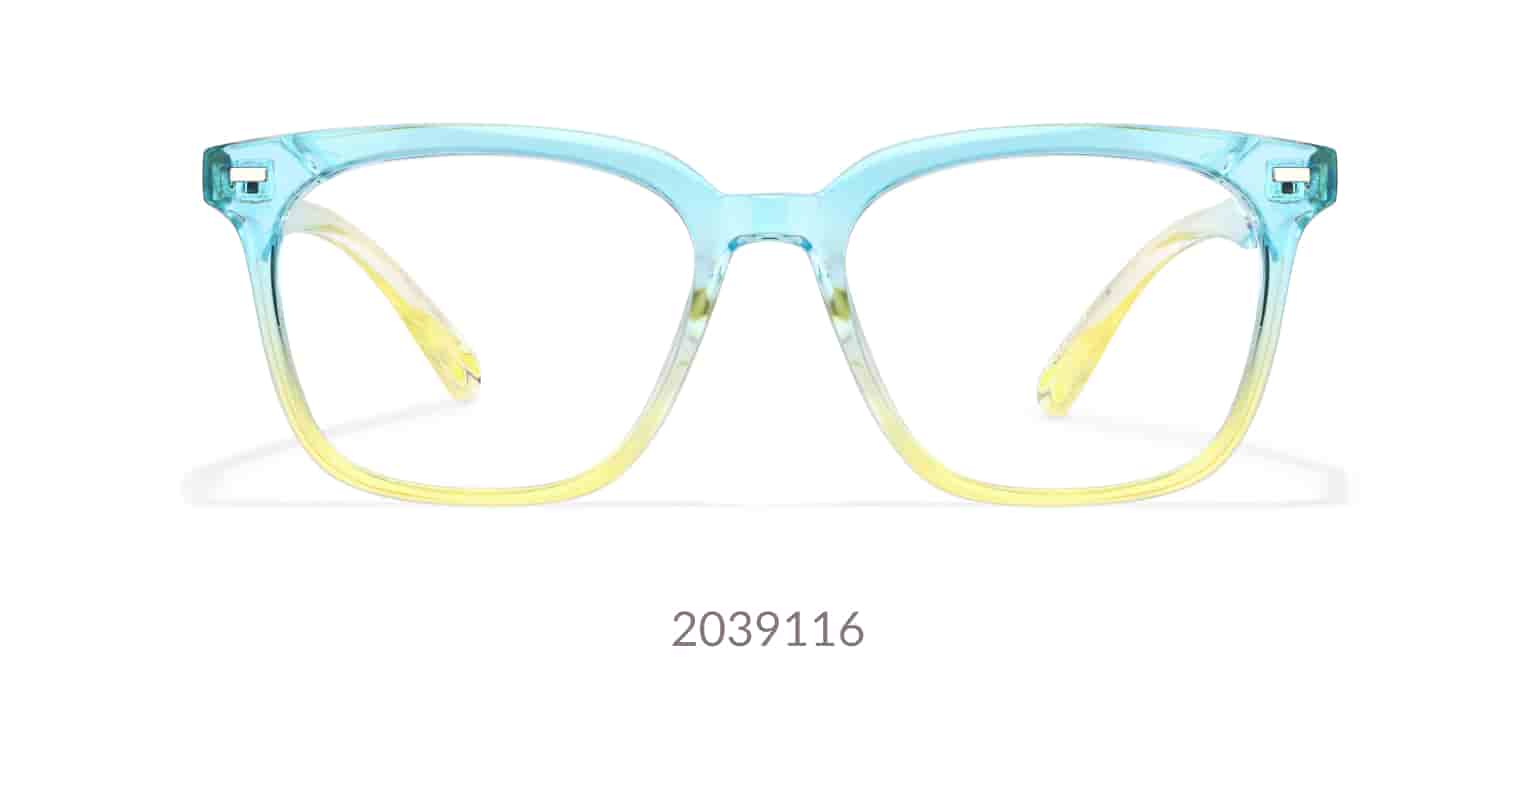 Image of zenni remakes andaman square glasses #2039116 against a white background. 